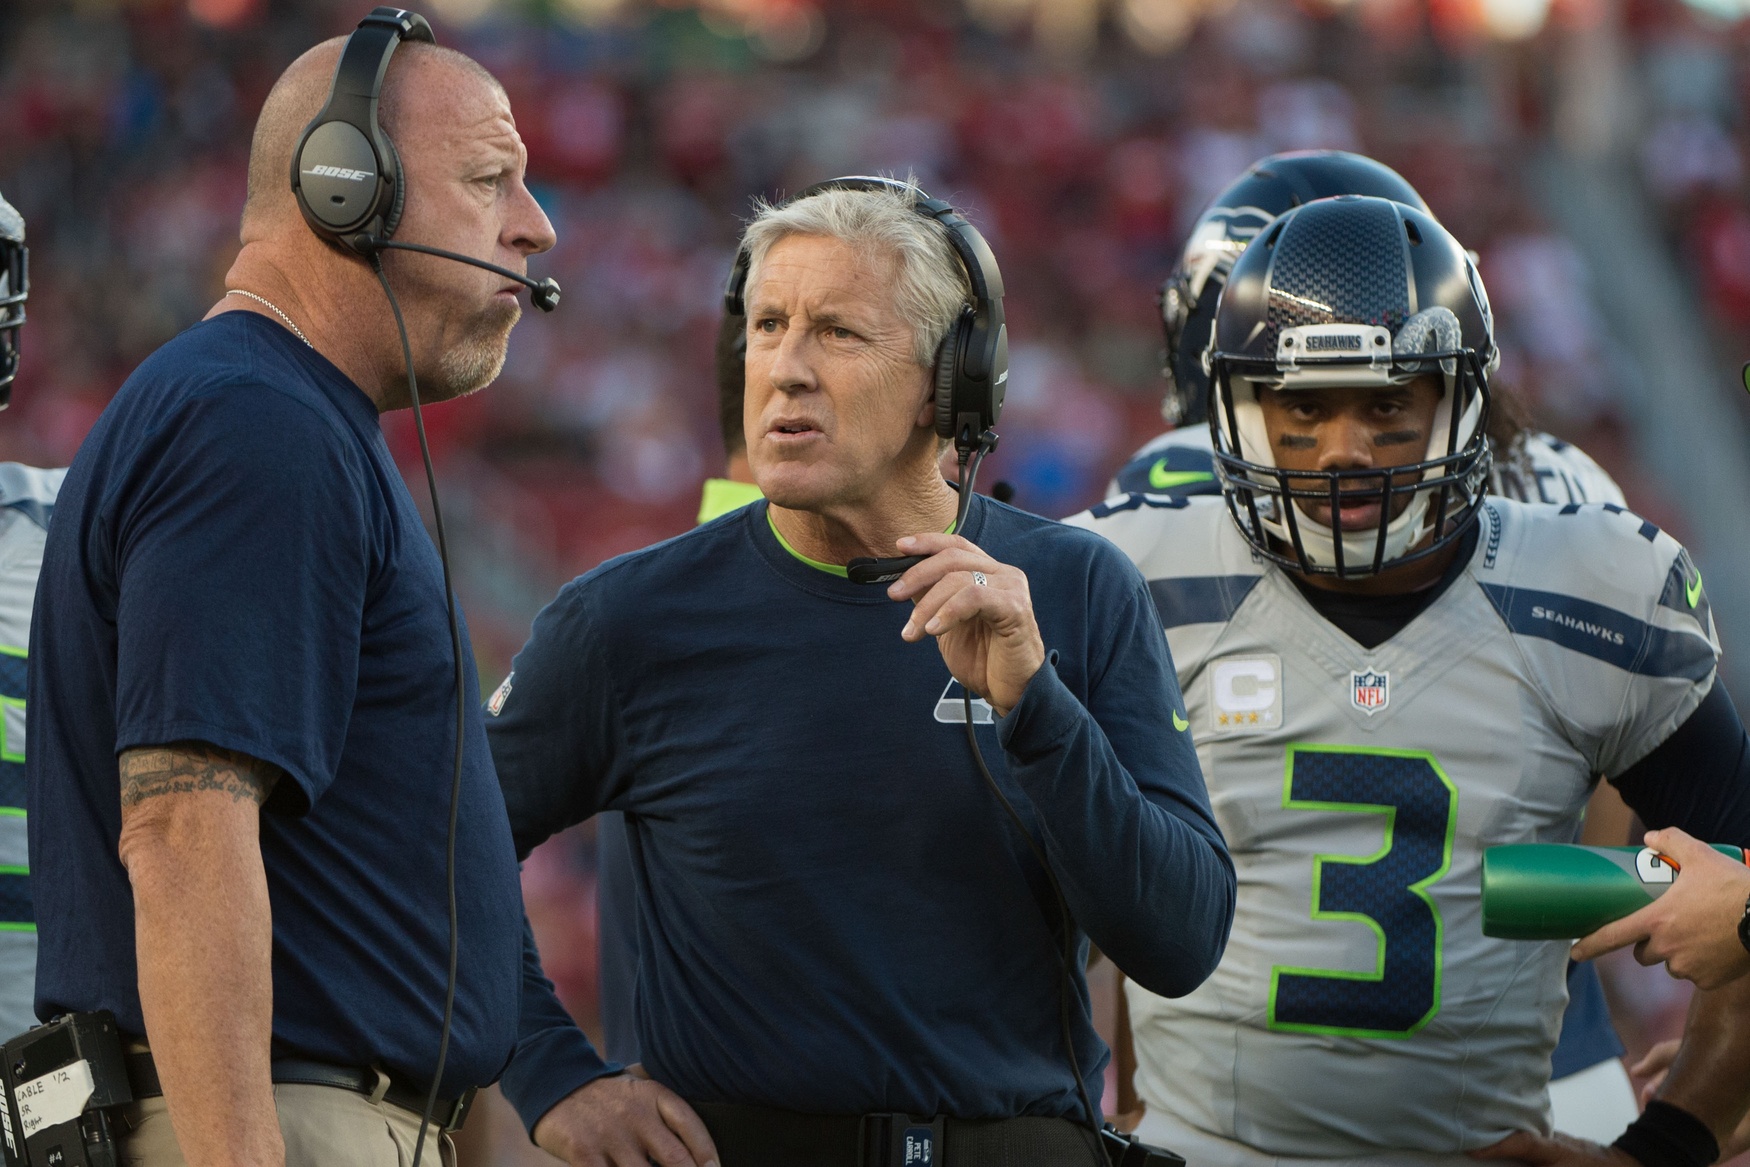 Pete Carroll oblivious to Seahawks' offensive line struggles1750 x 1167